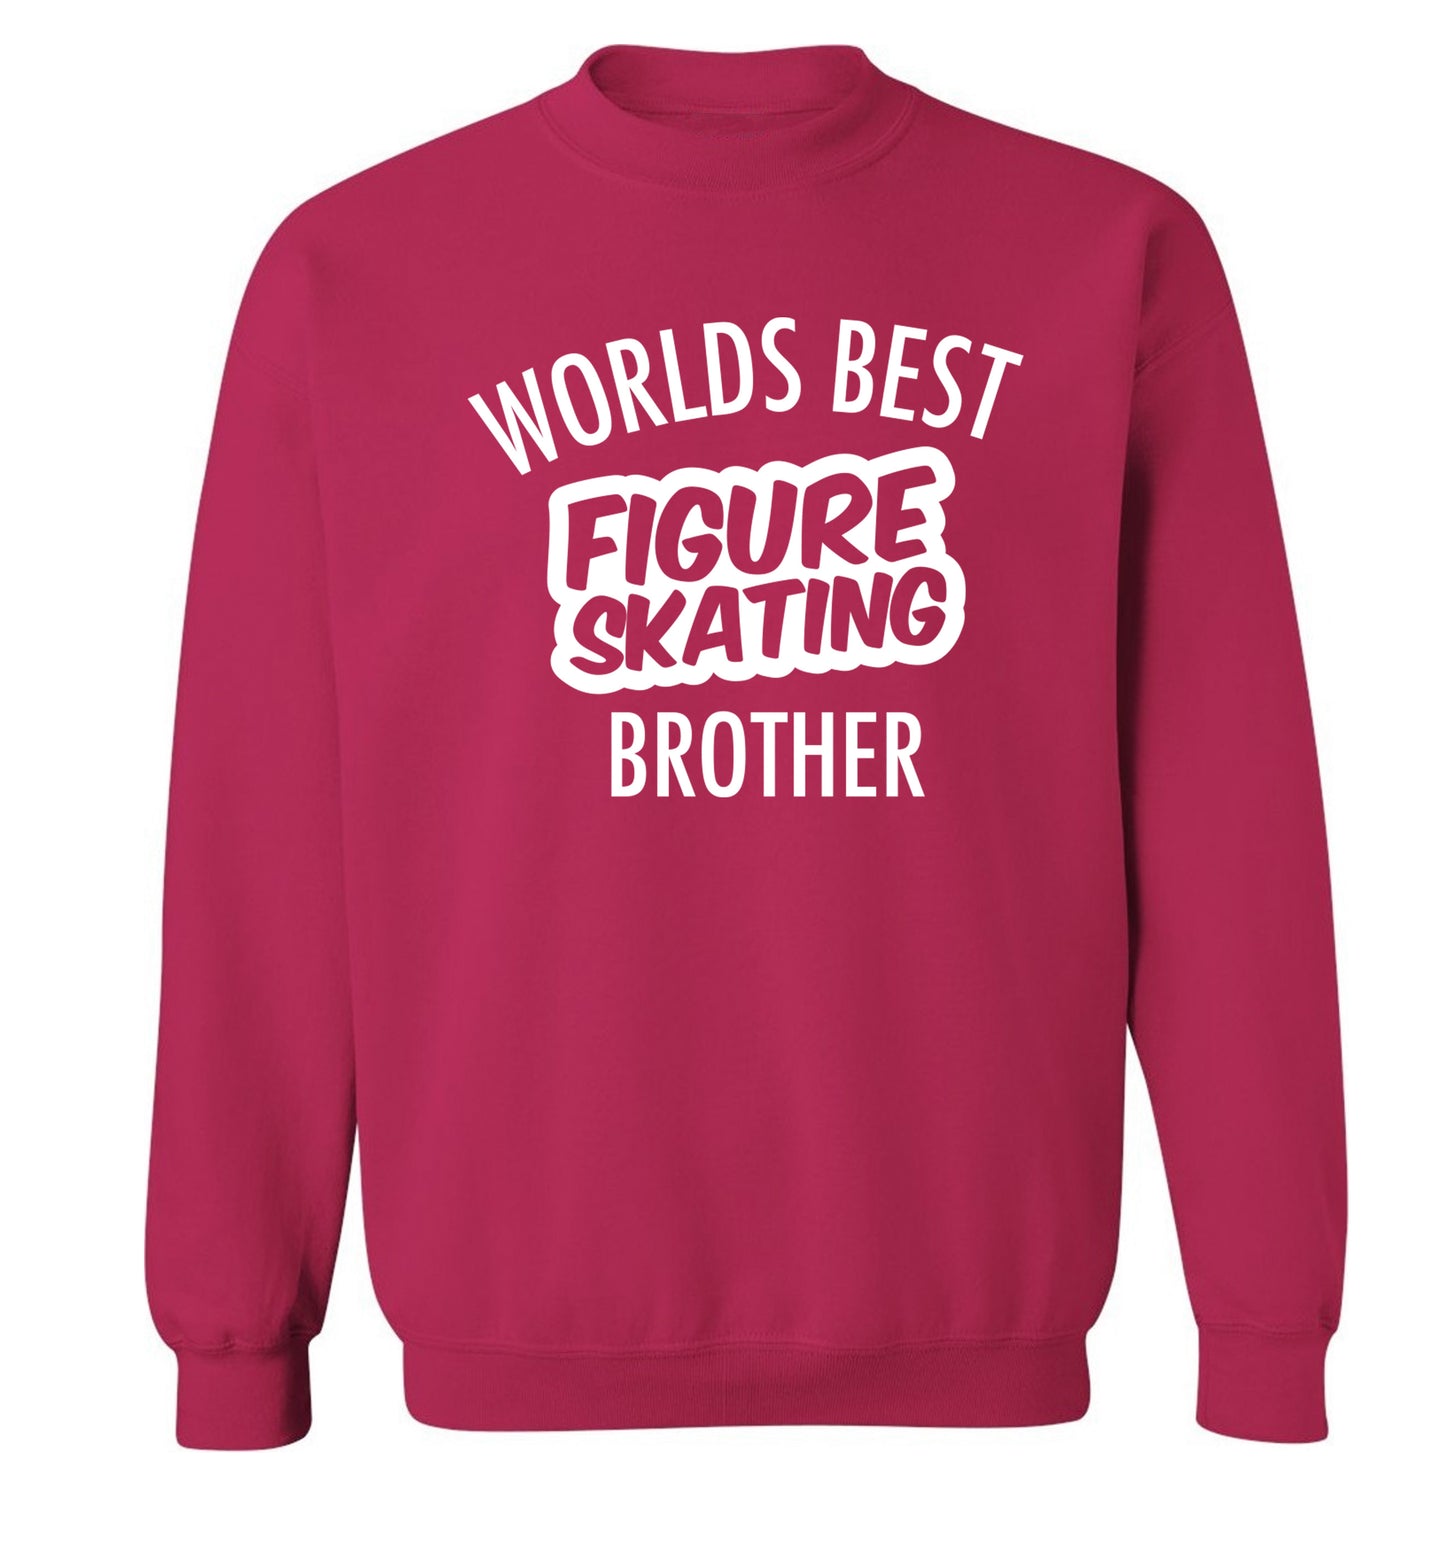 Worlds best figure skating brother Adult's unisexpink Sweater 2XL